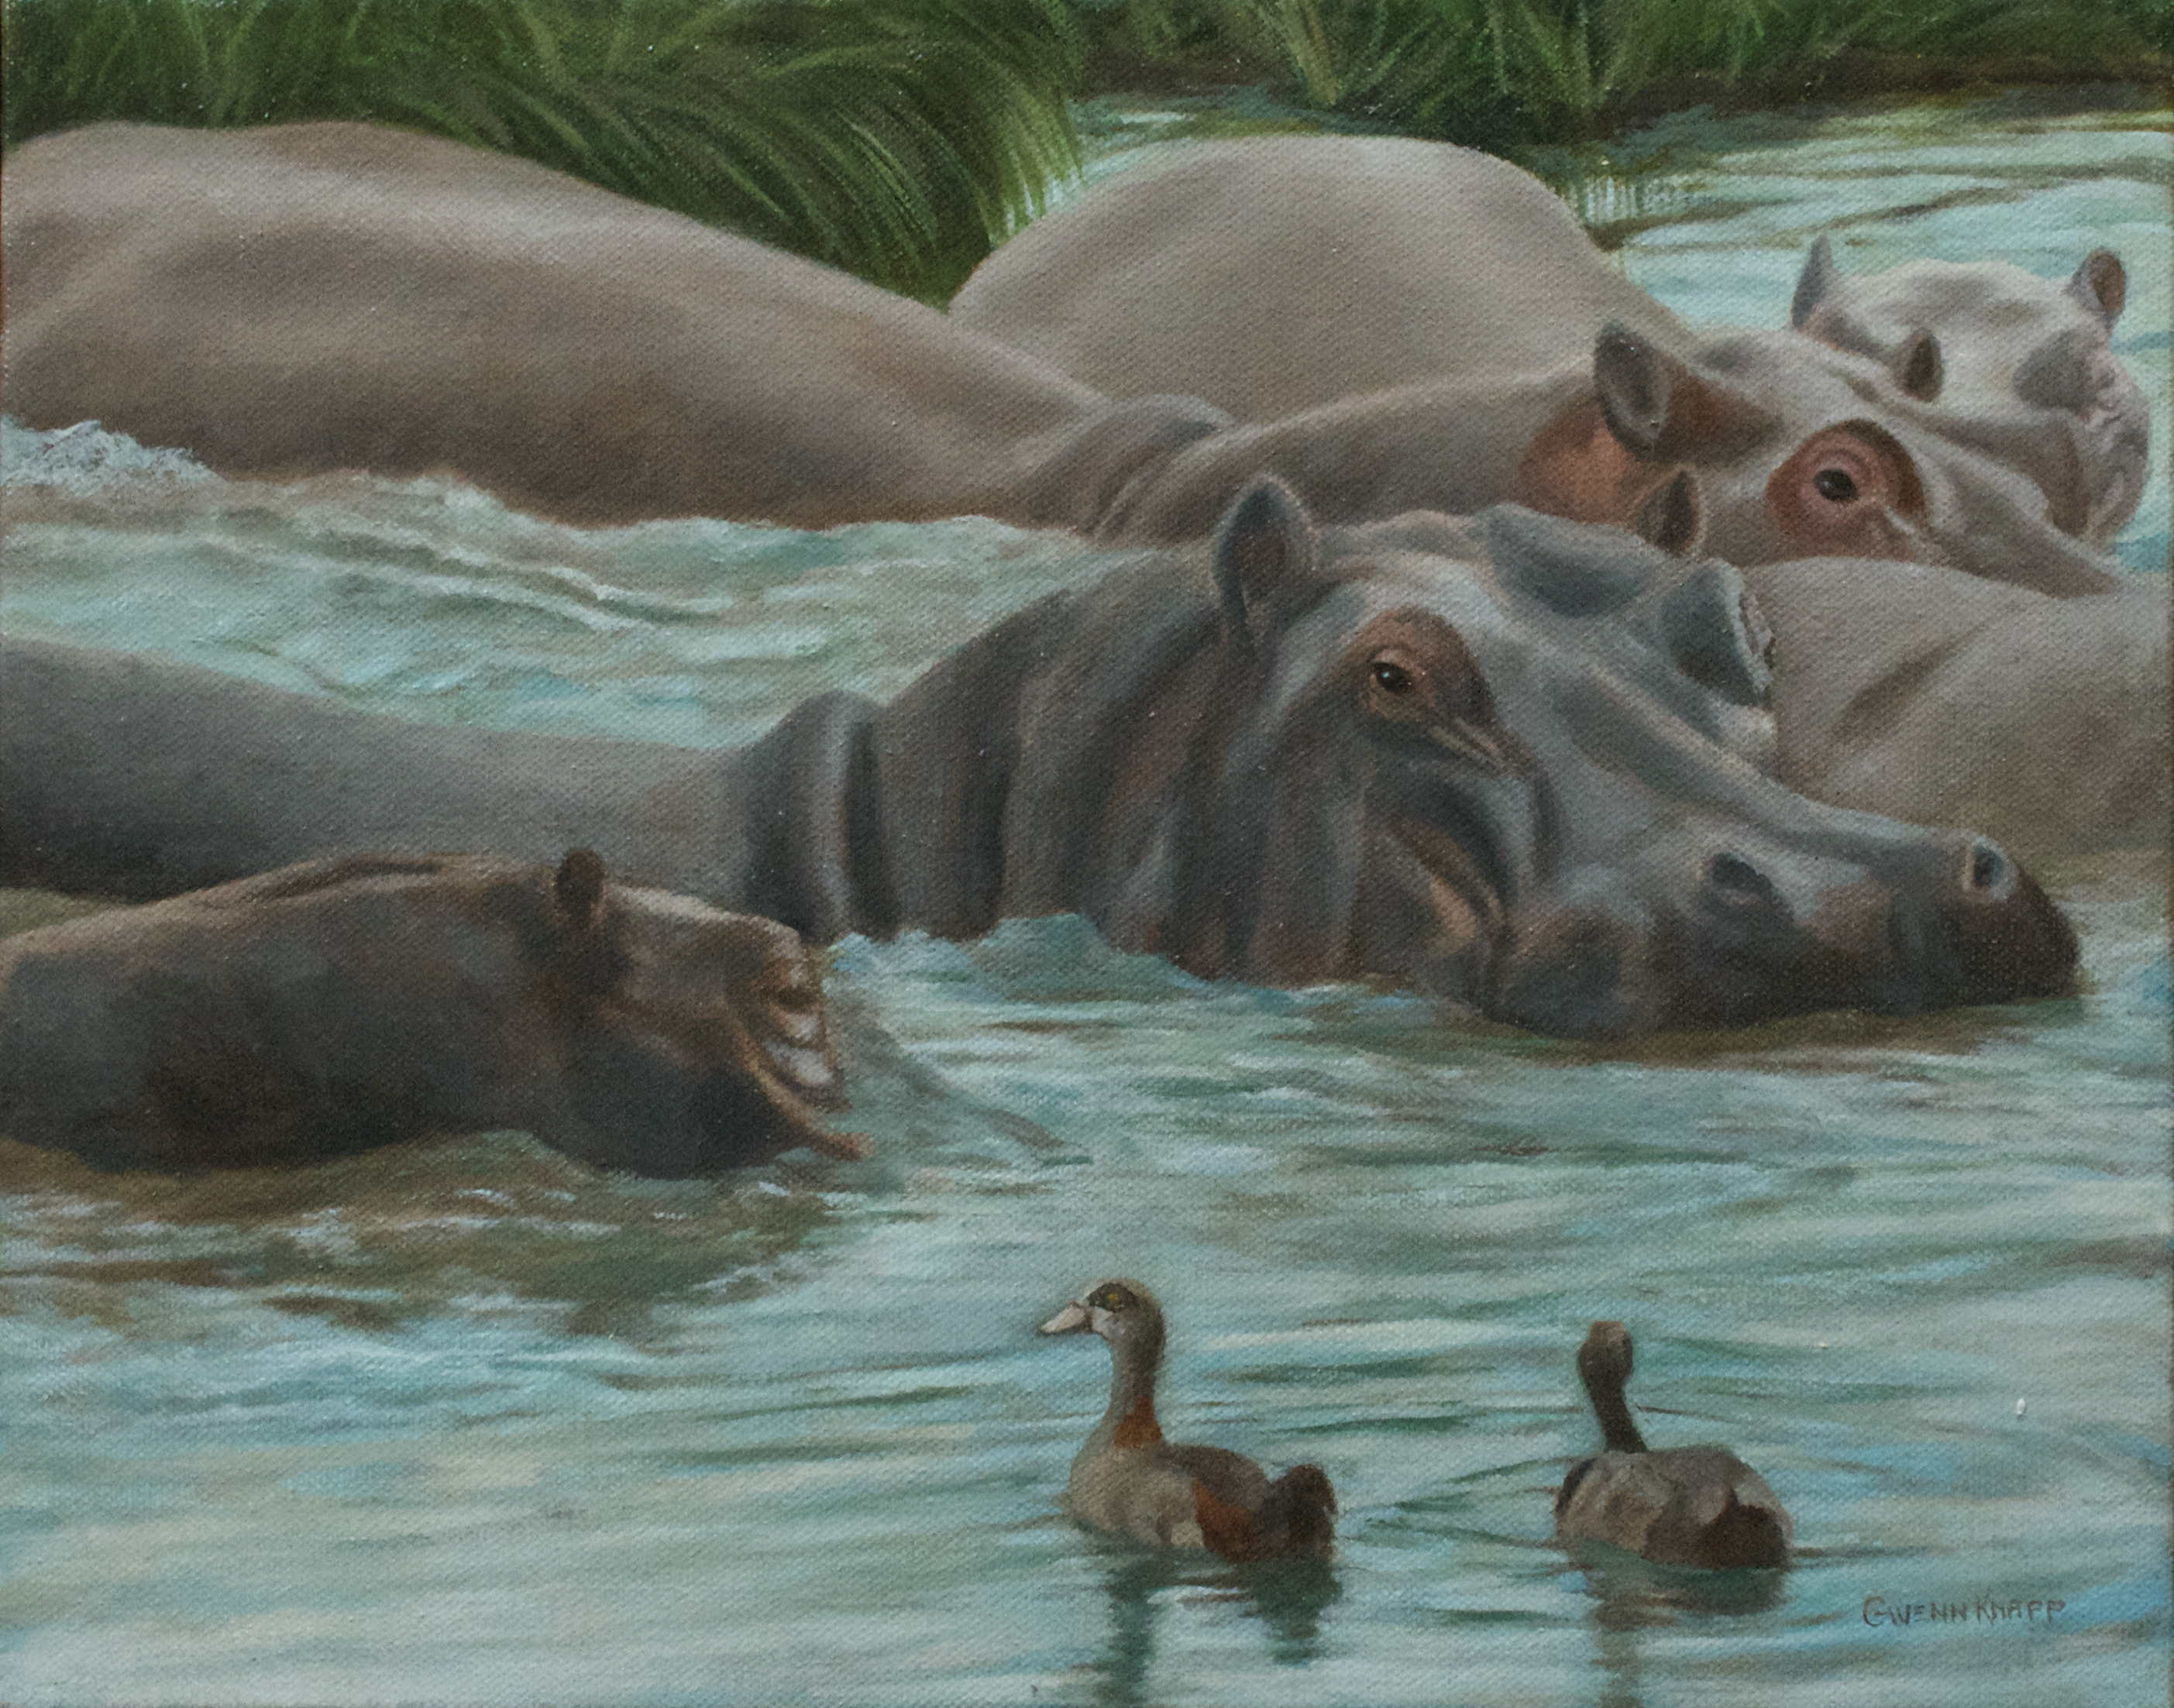 Bloatofhippos cunkln